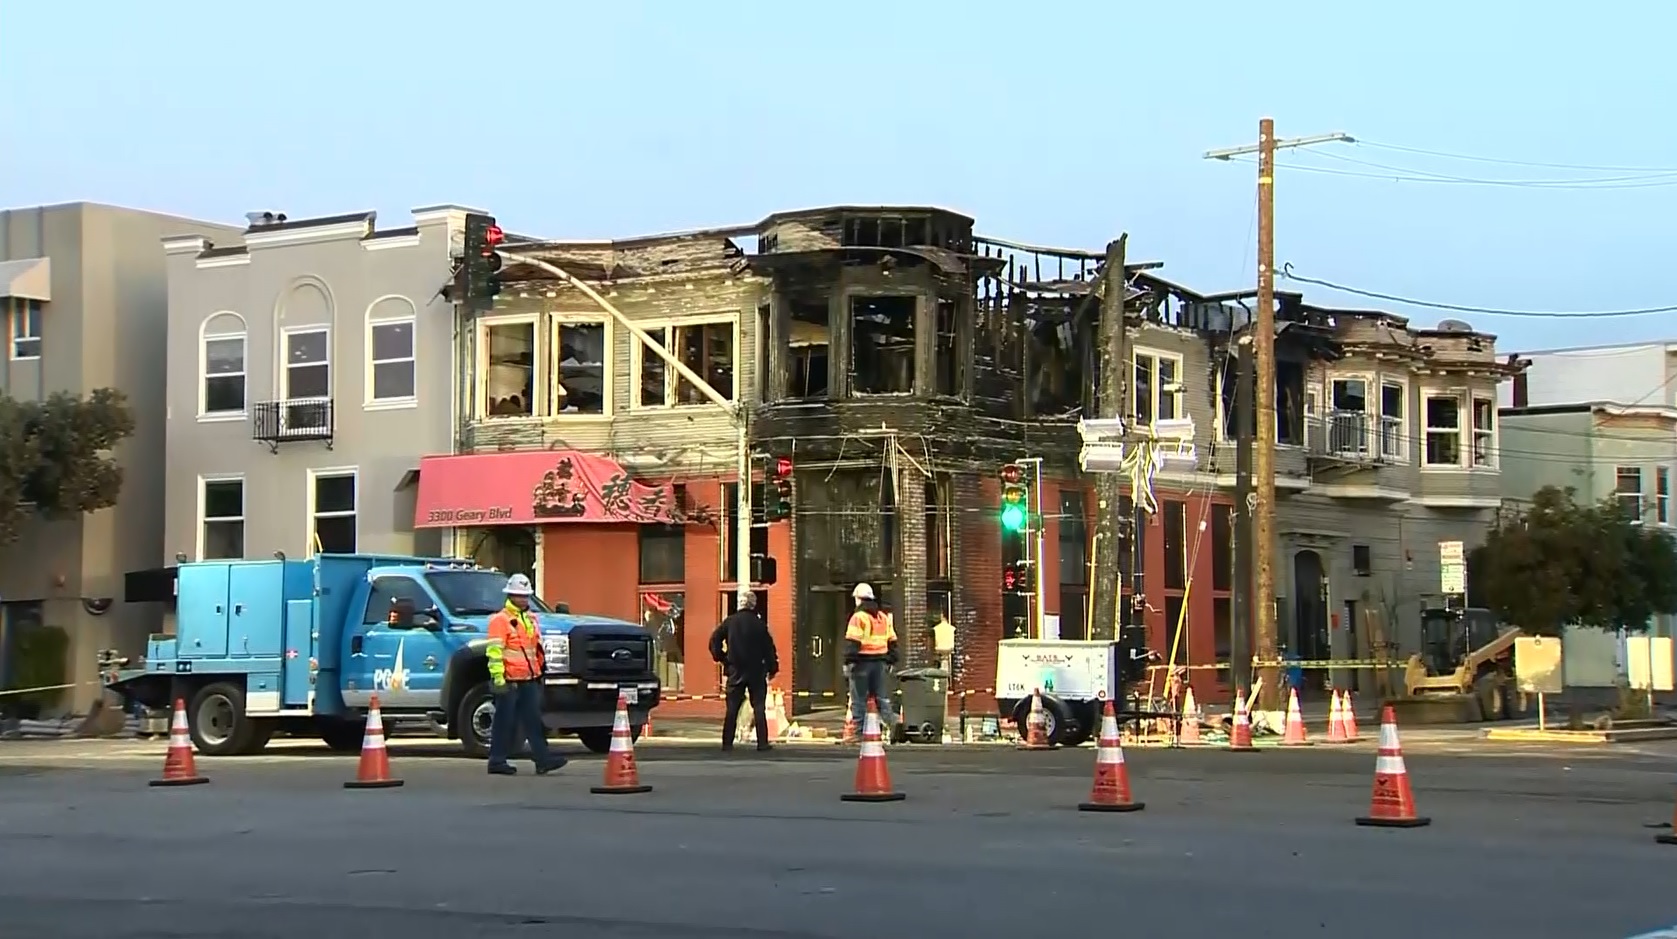 Crews on the scene of Geary Boulevard and Parker Avenue in San Francisco on February 7, 2019, the day after a major natural gas line explosion in the area. (CBS)